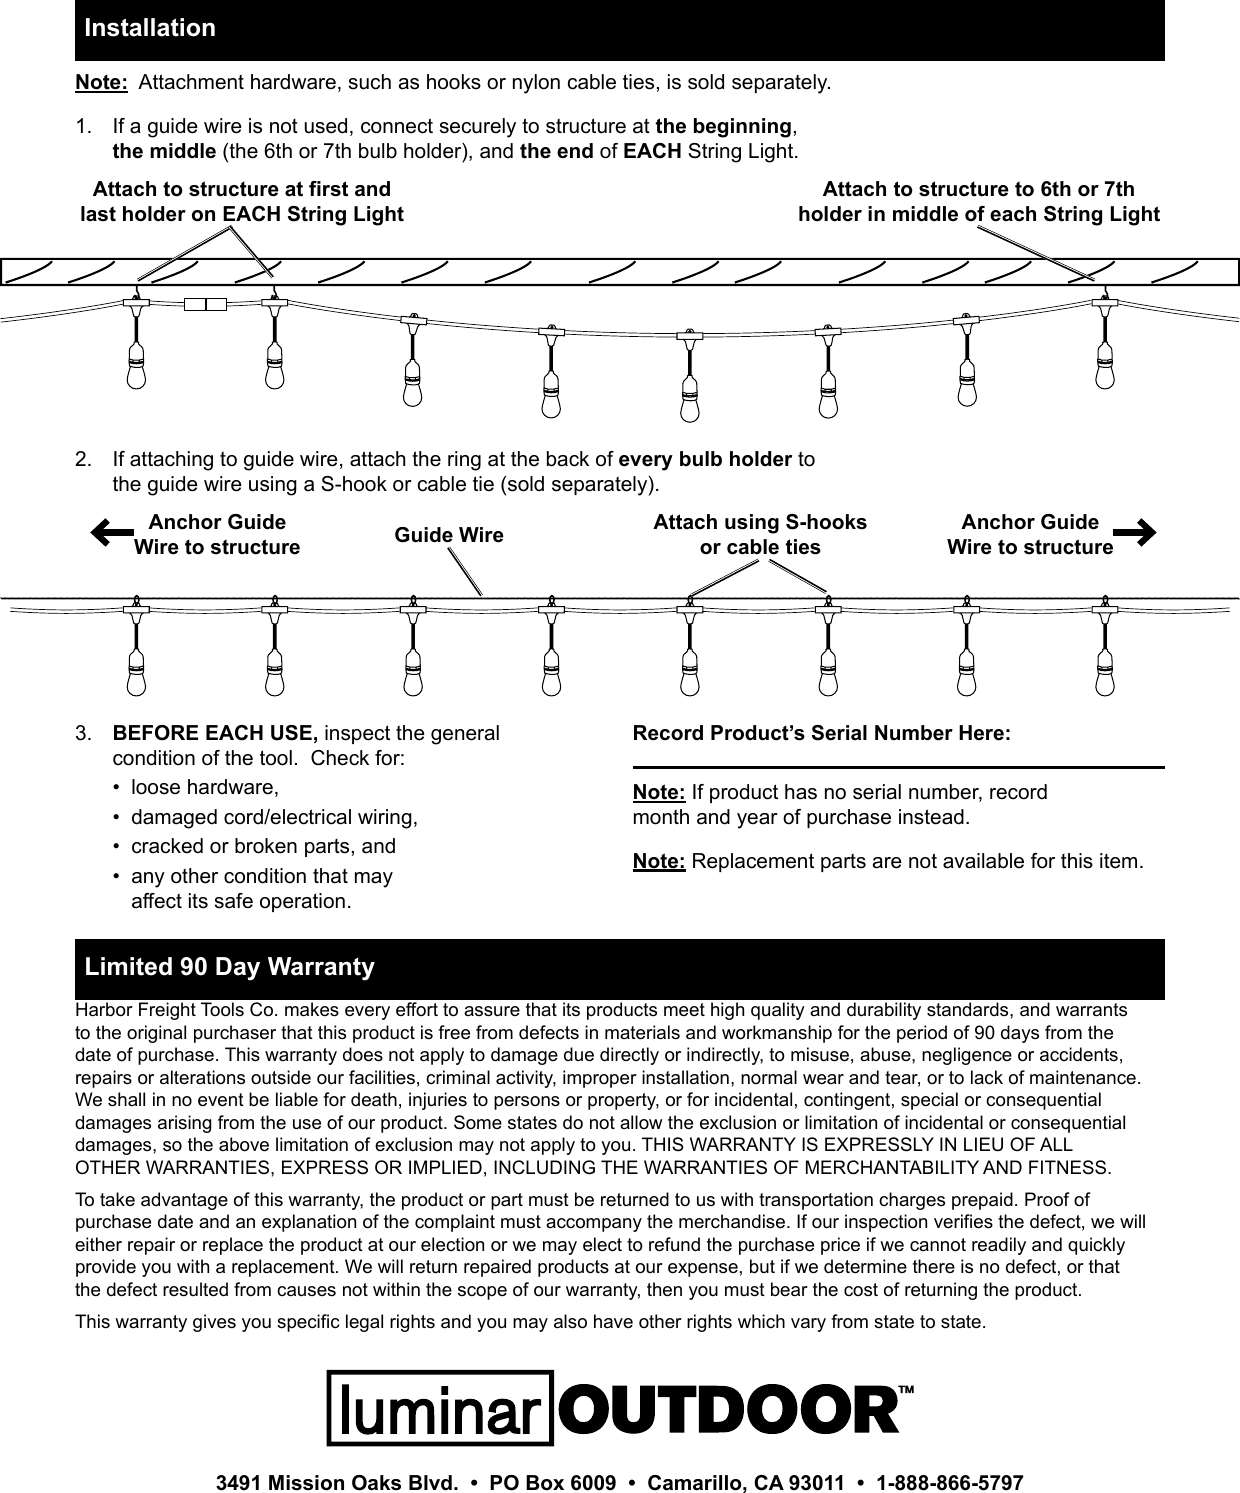 Page 4 of 4 - Manual For The 63483 24 Ft. 12 Bulb Outdoor String Lights